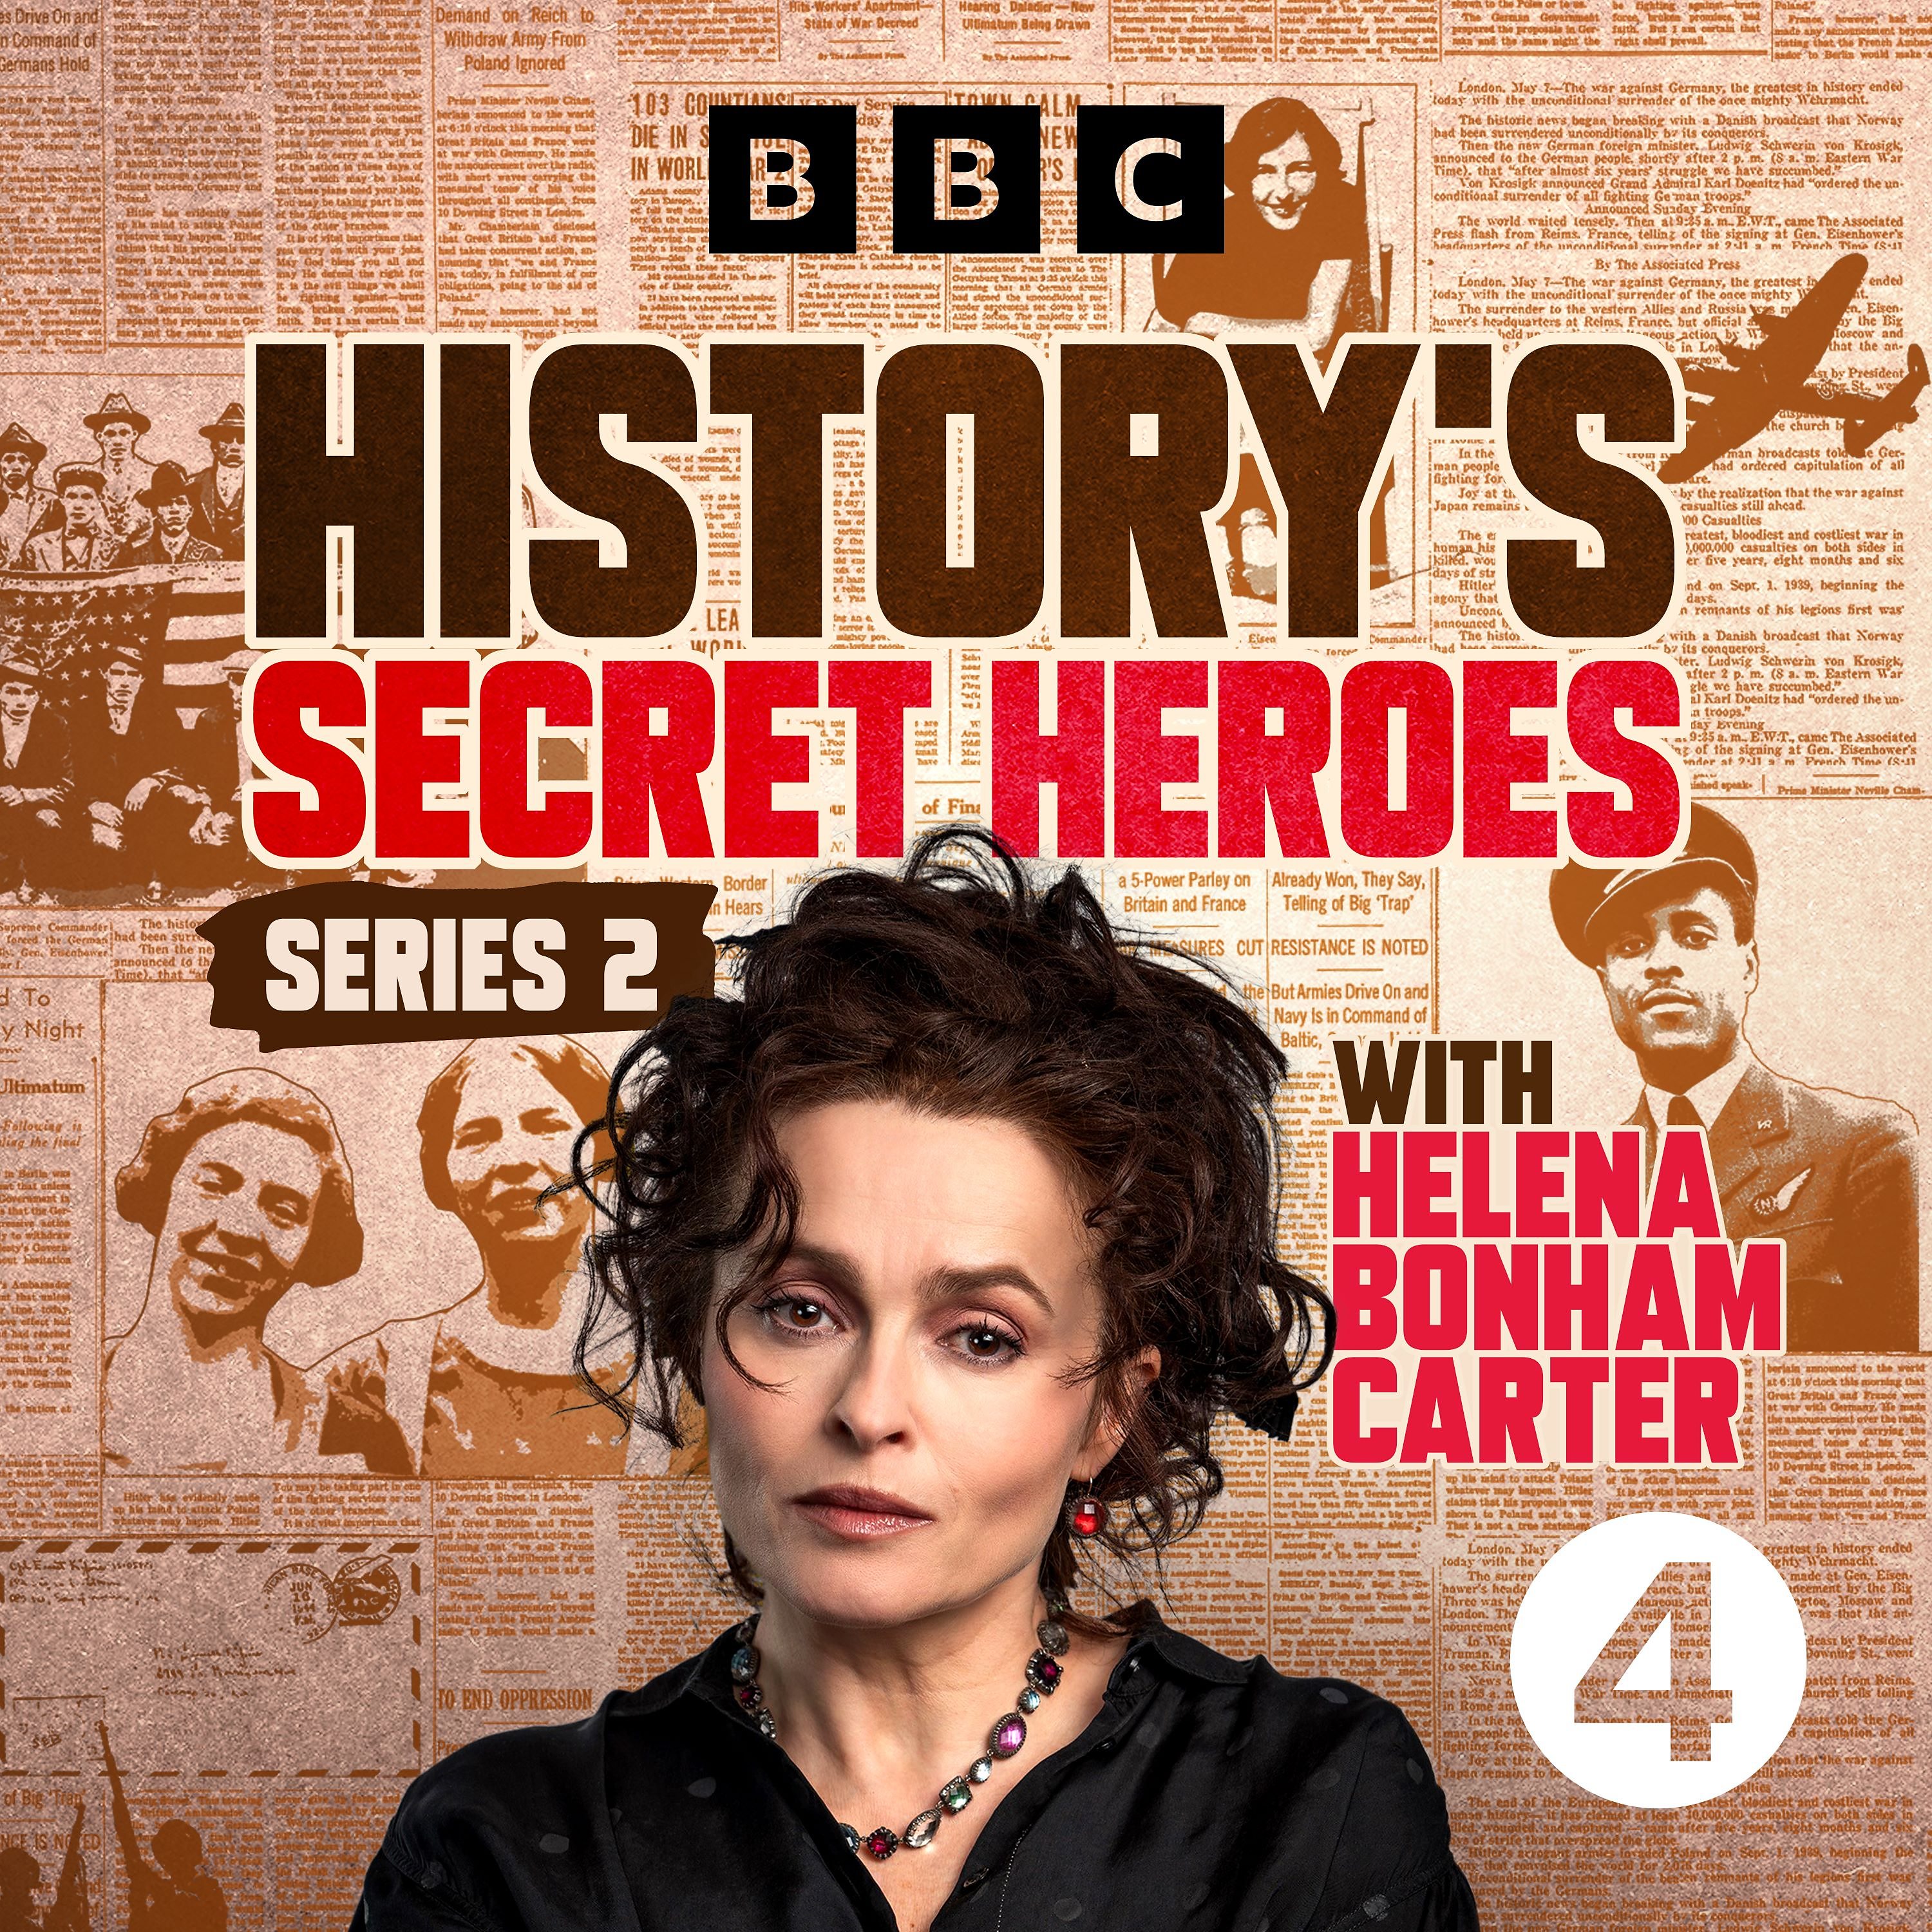 Introducing History's Secret Heroes Series 2 by BBC Radio 4